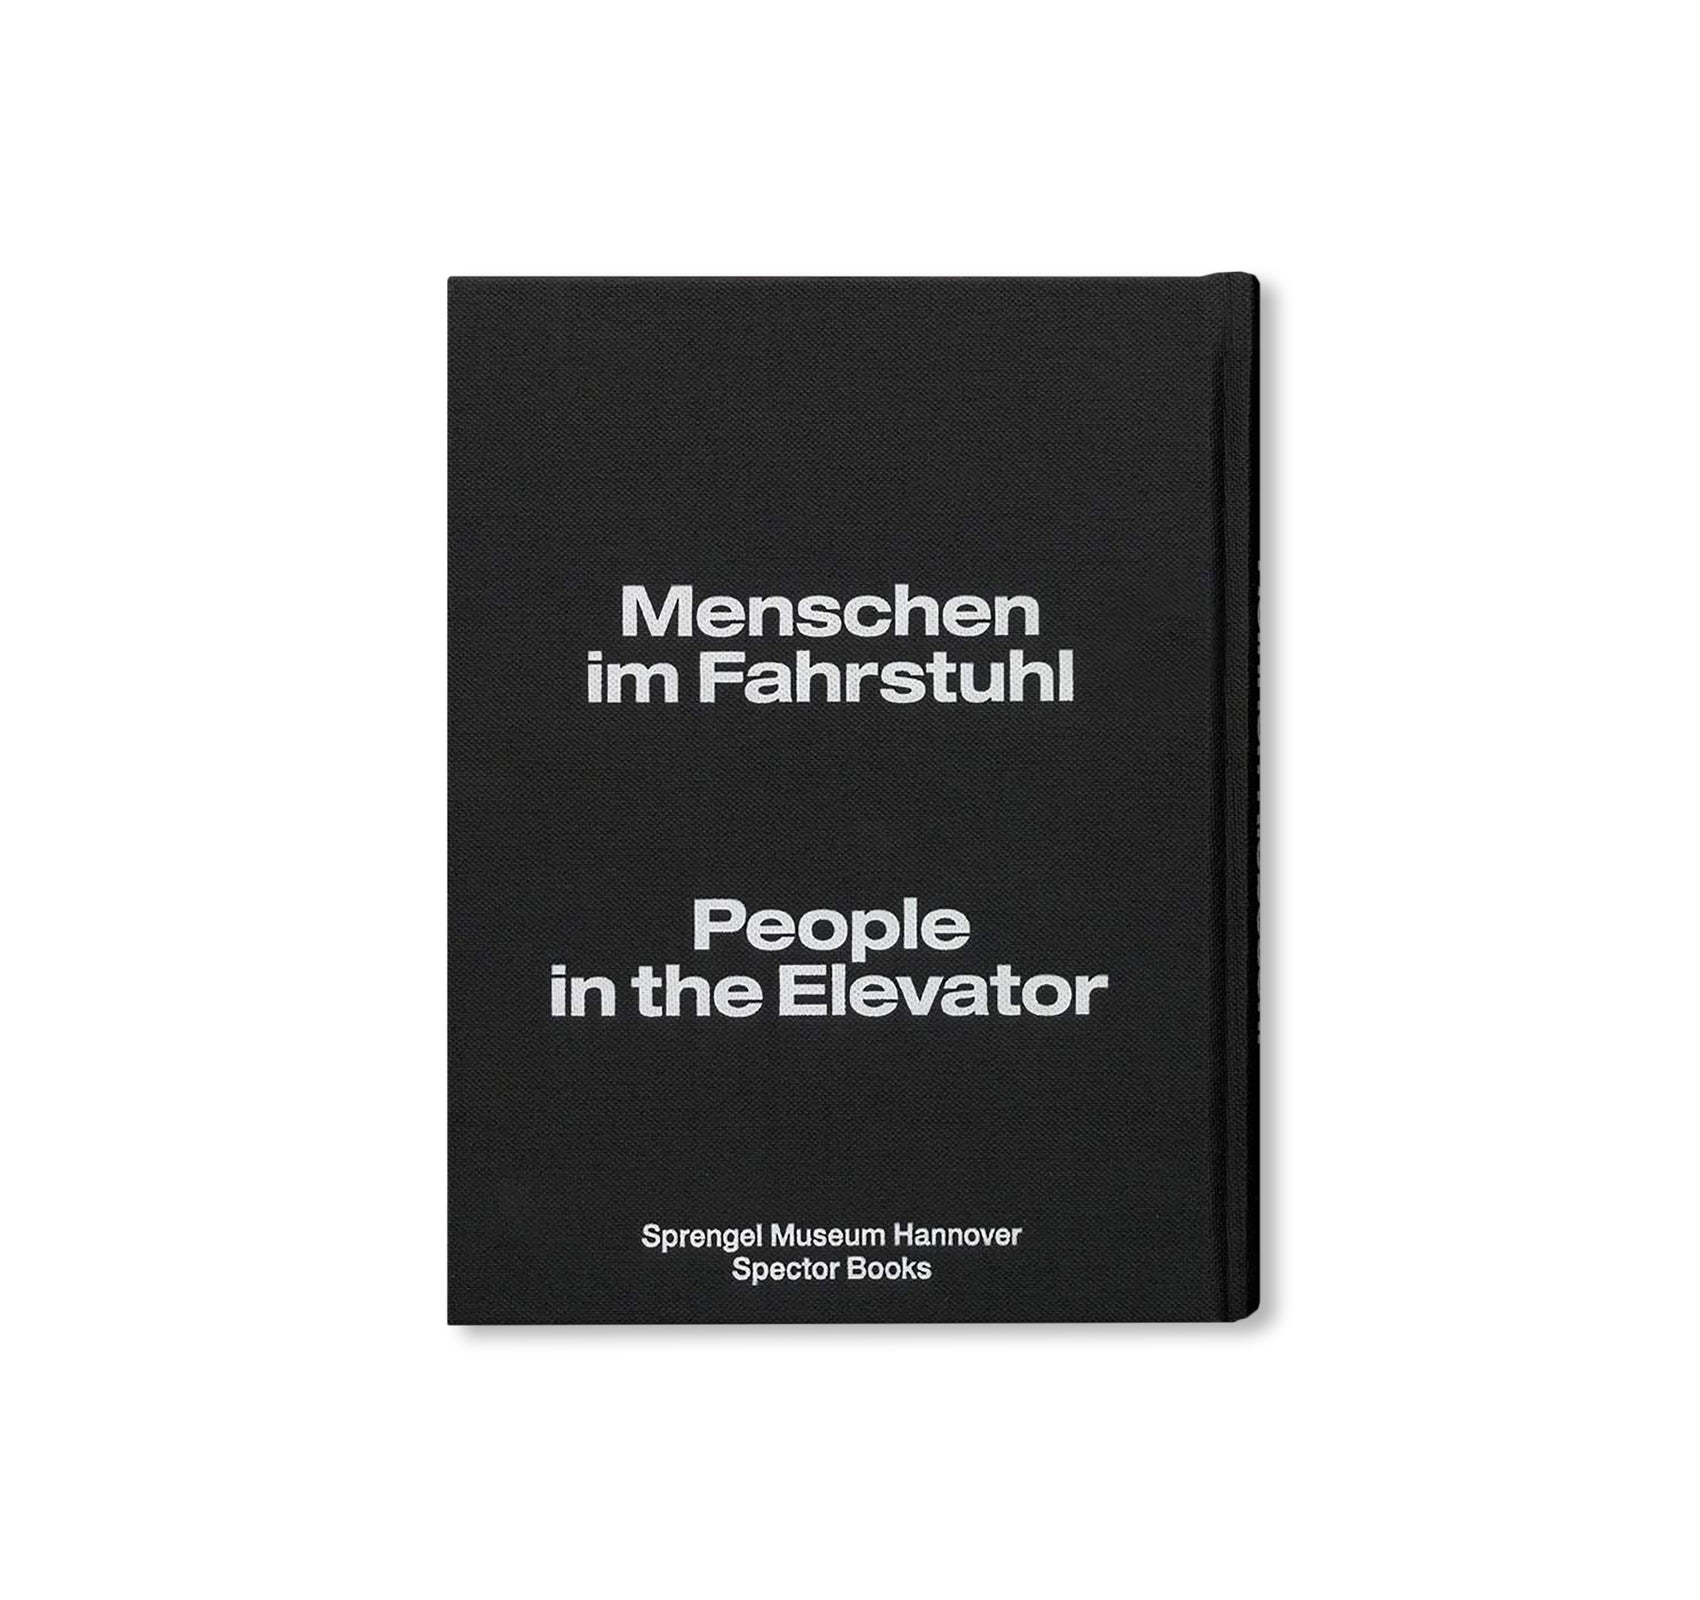 PEOPLE IN THE ELEVATOR by Heinrich Riebesehl